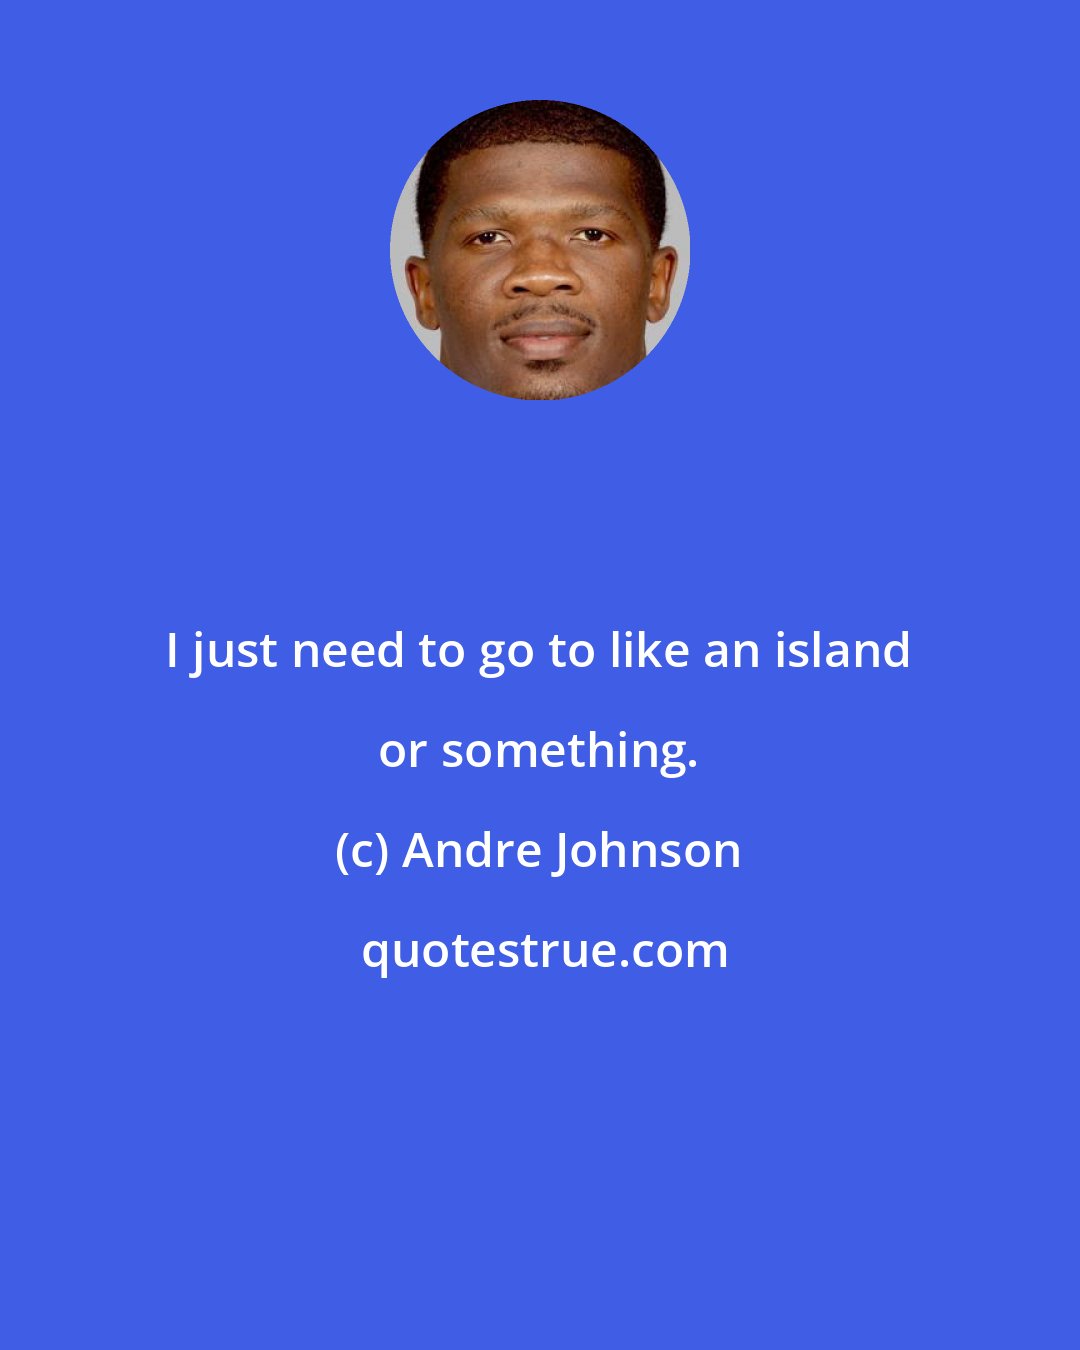 Andre Johnson: I just need to go to like an island or something.